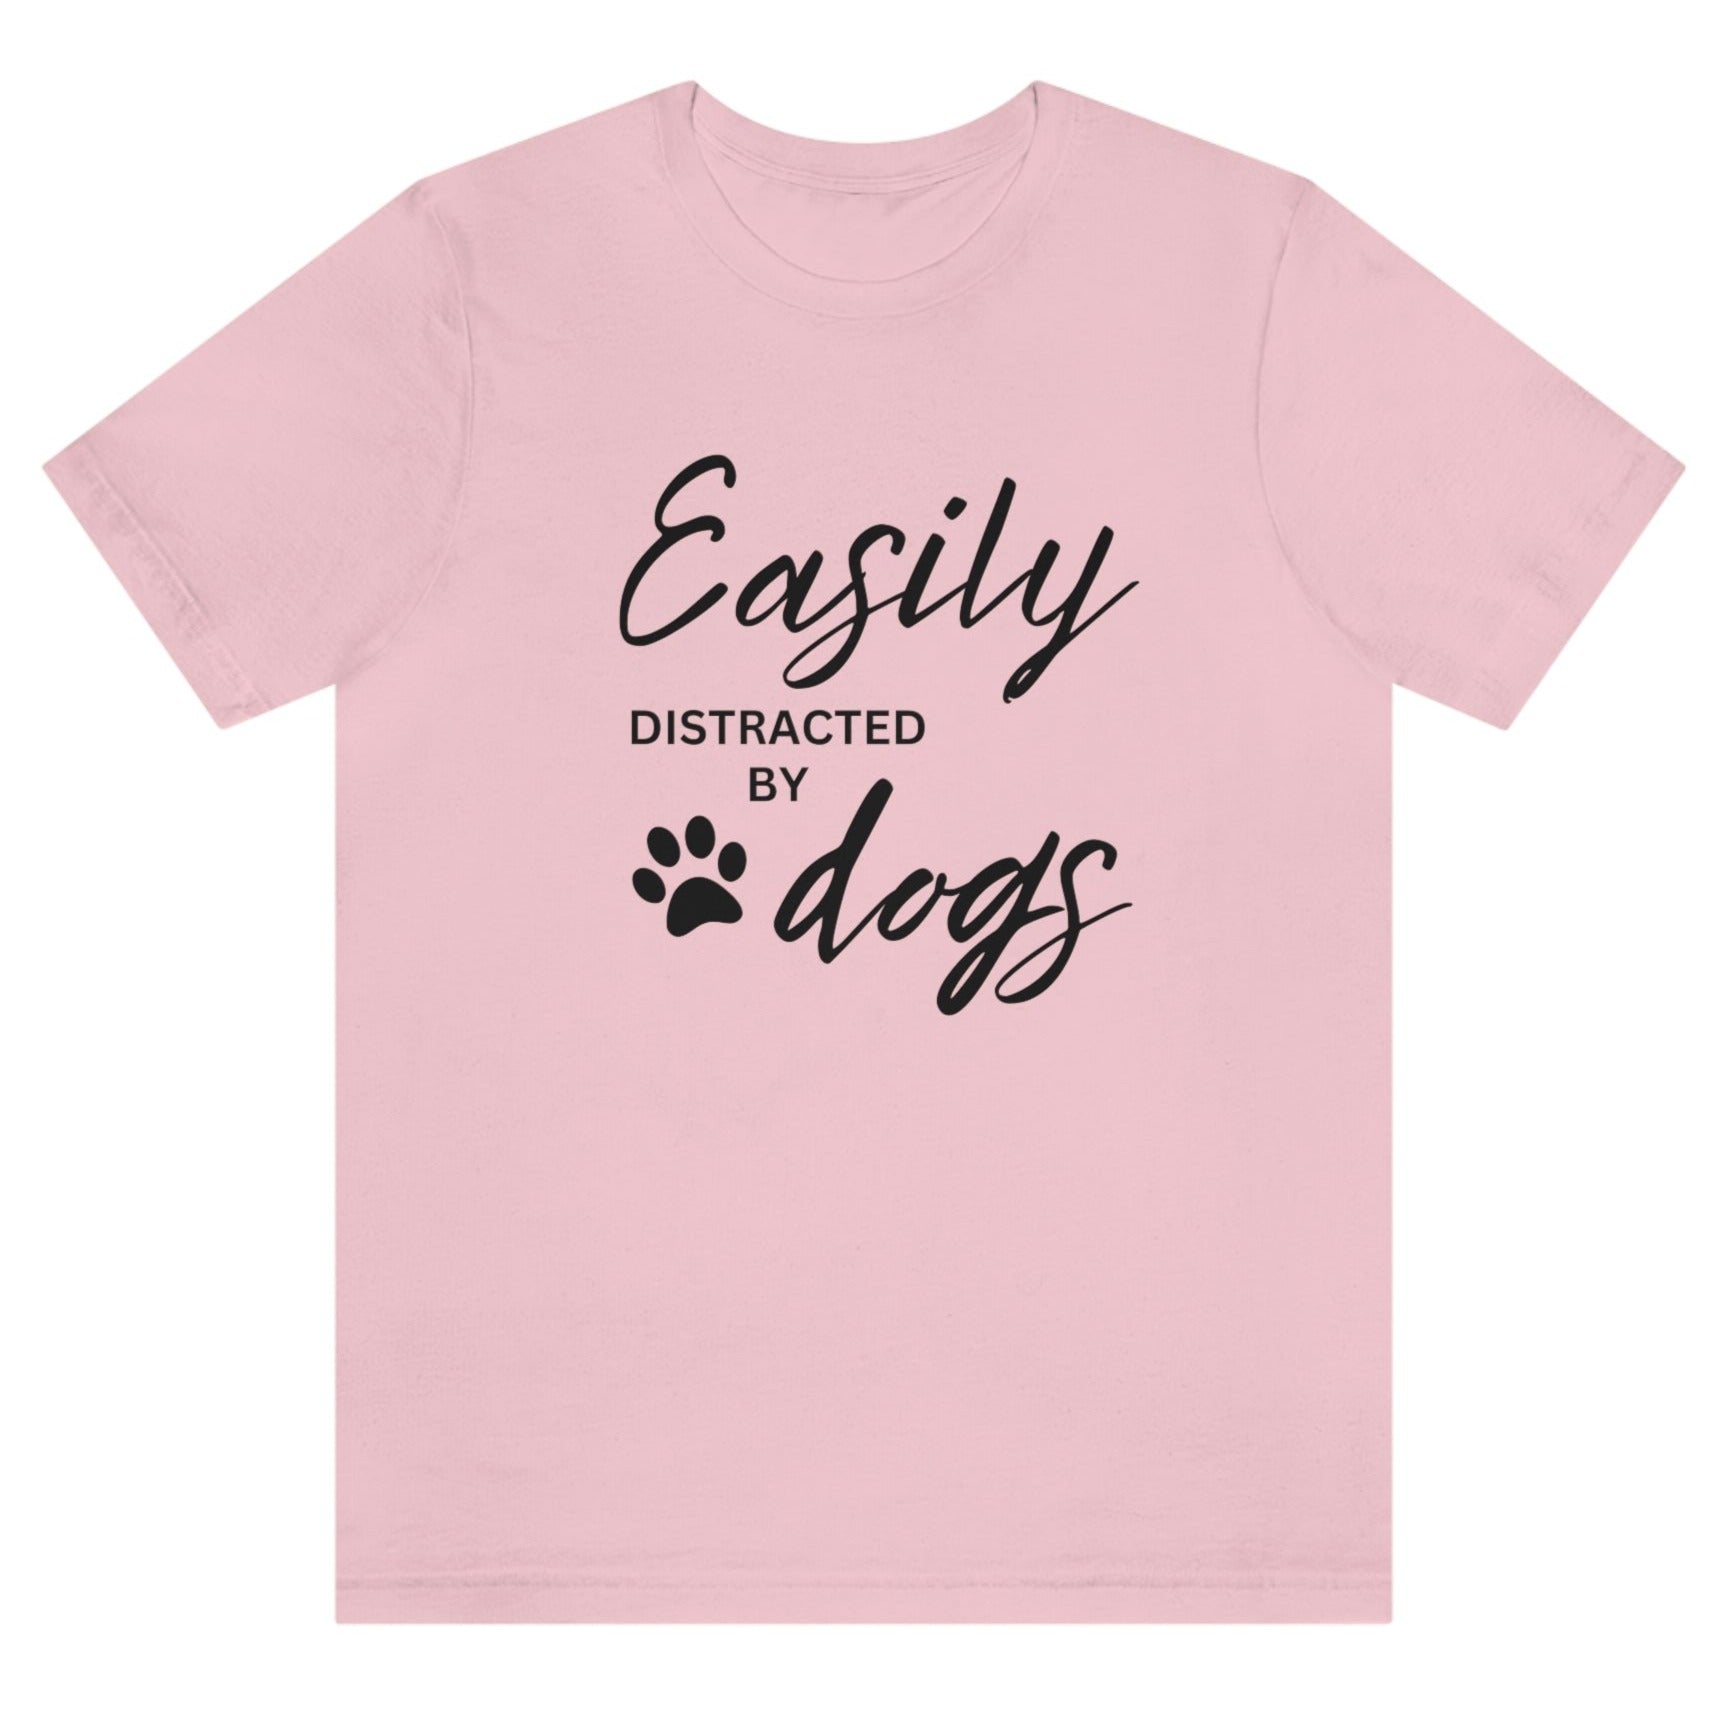 easily-distracted-by-dogs-pink-t-shirt-womens-animal-lover